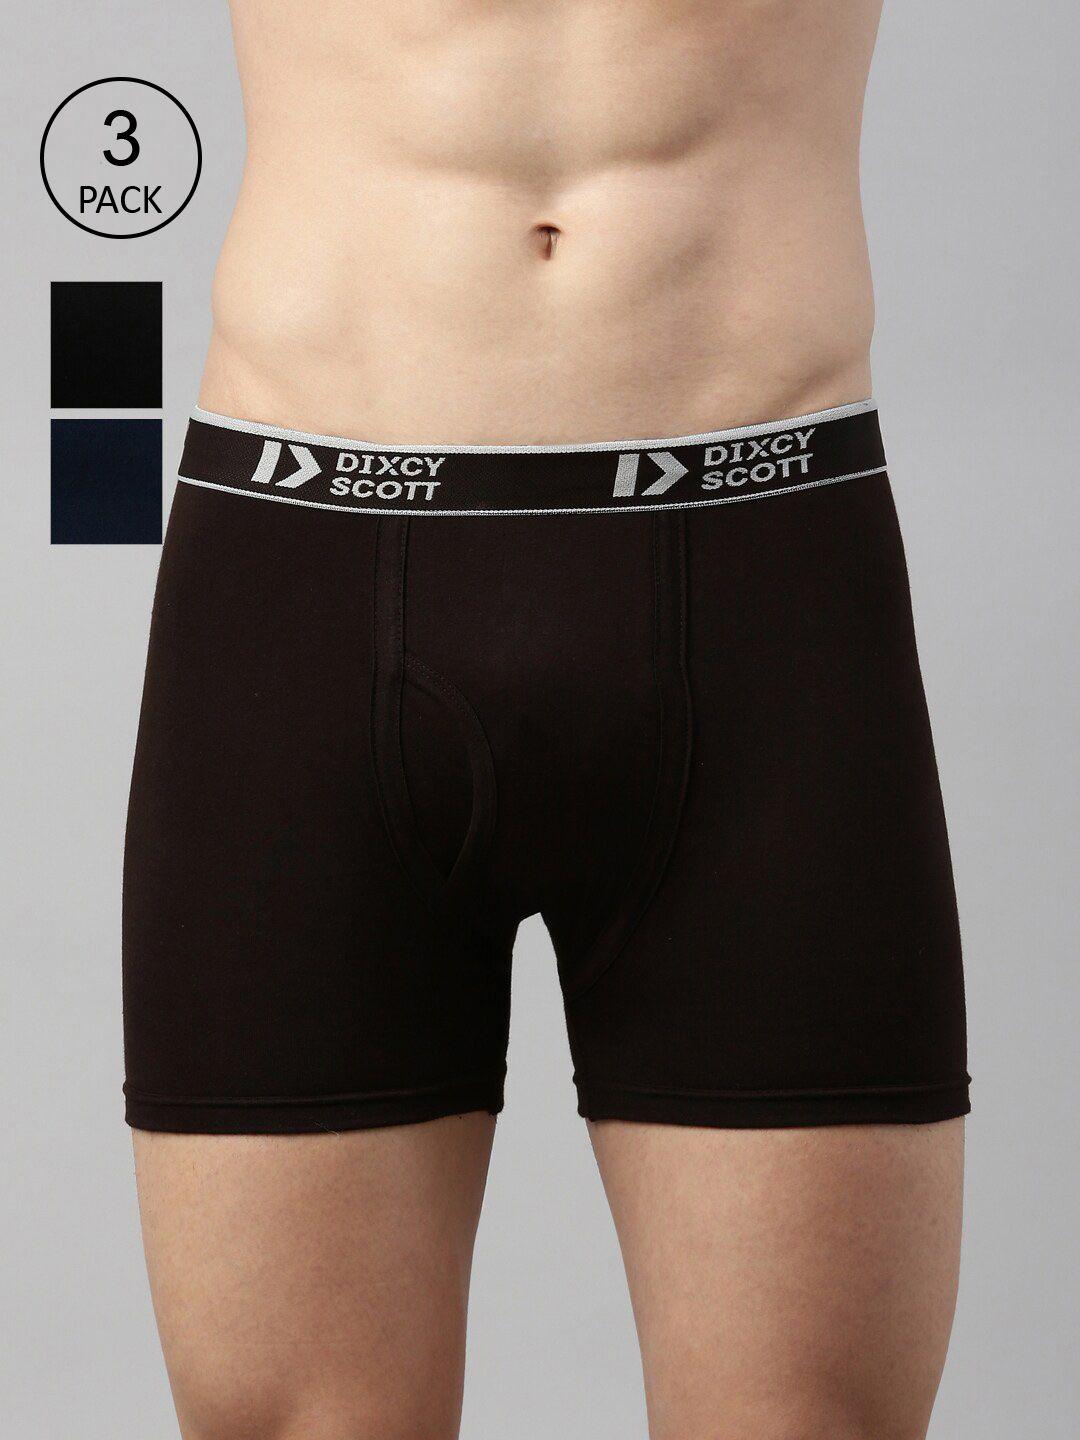 dixcy scott men pack of 3 solid cotton trunk dso-cross trunk-p3